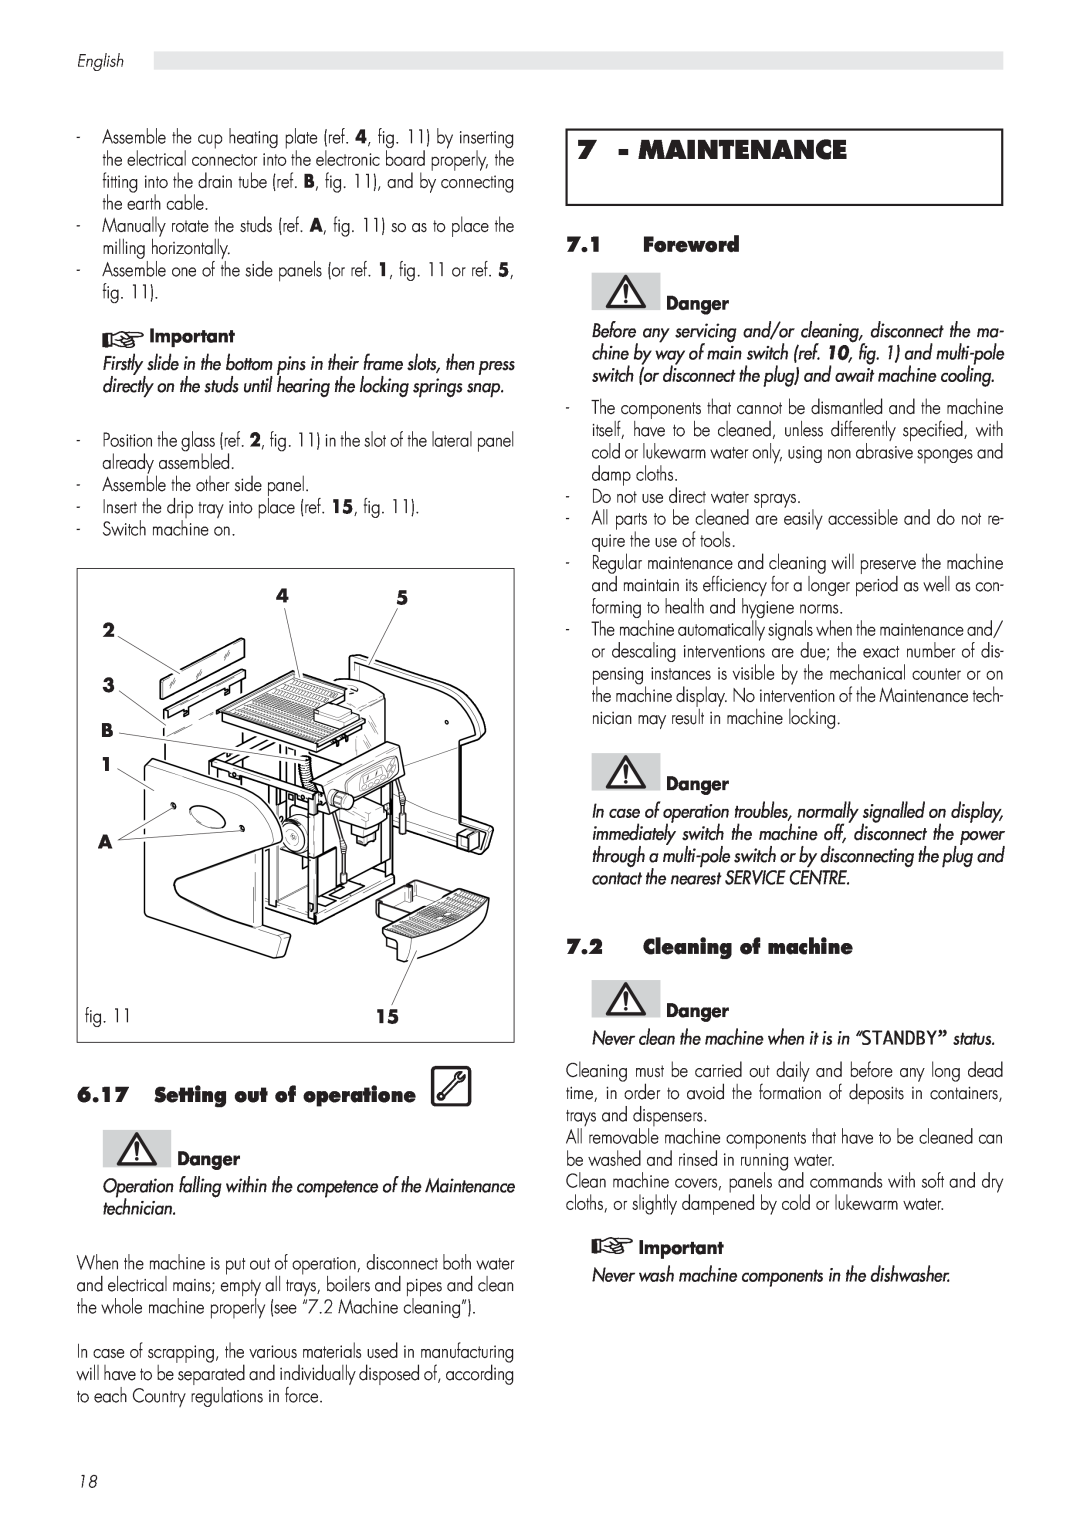 Saeco Coffee Makers CAP001/A manual Maintenance, 6.17Setting out of operatione, 7.1Foreword, 7.2Cleaning of machine 